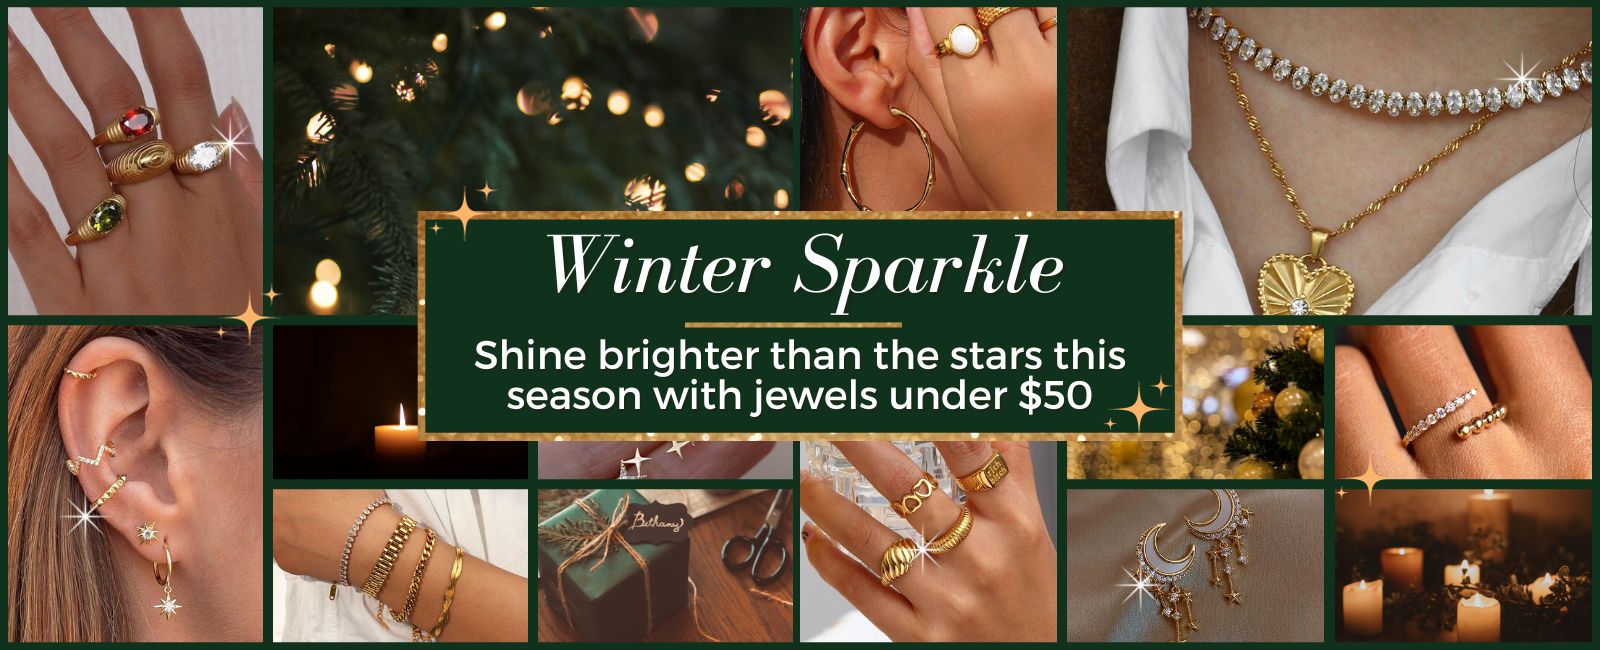 Fashionable jewellery for winter